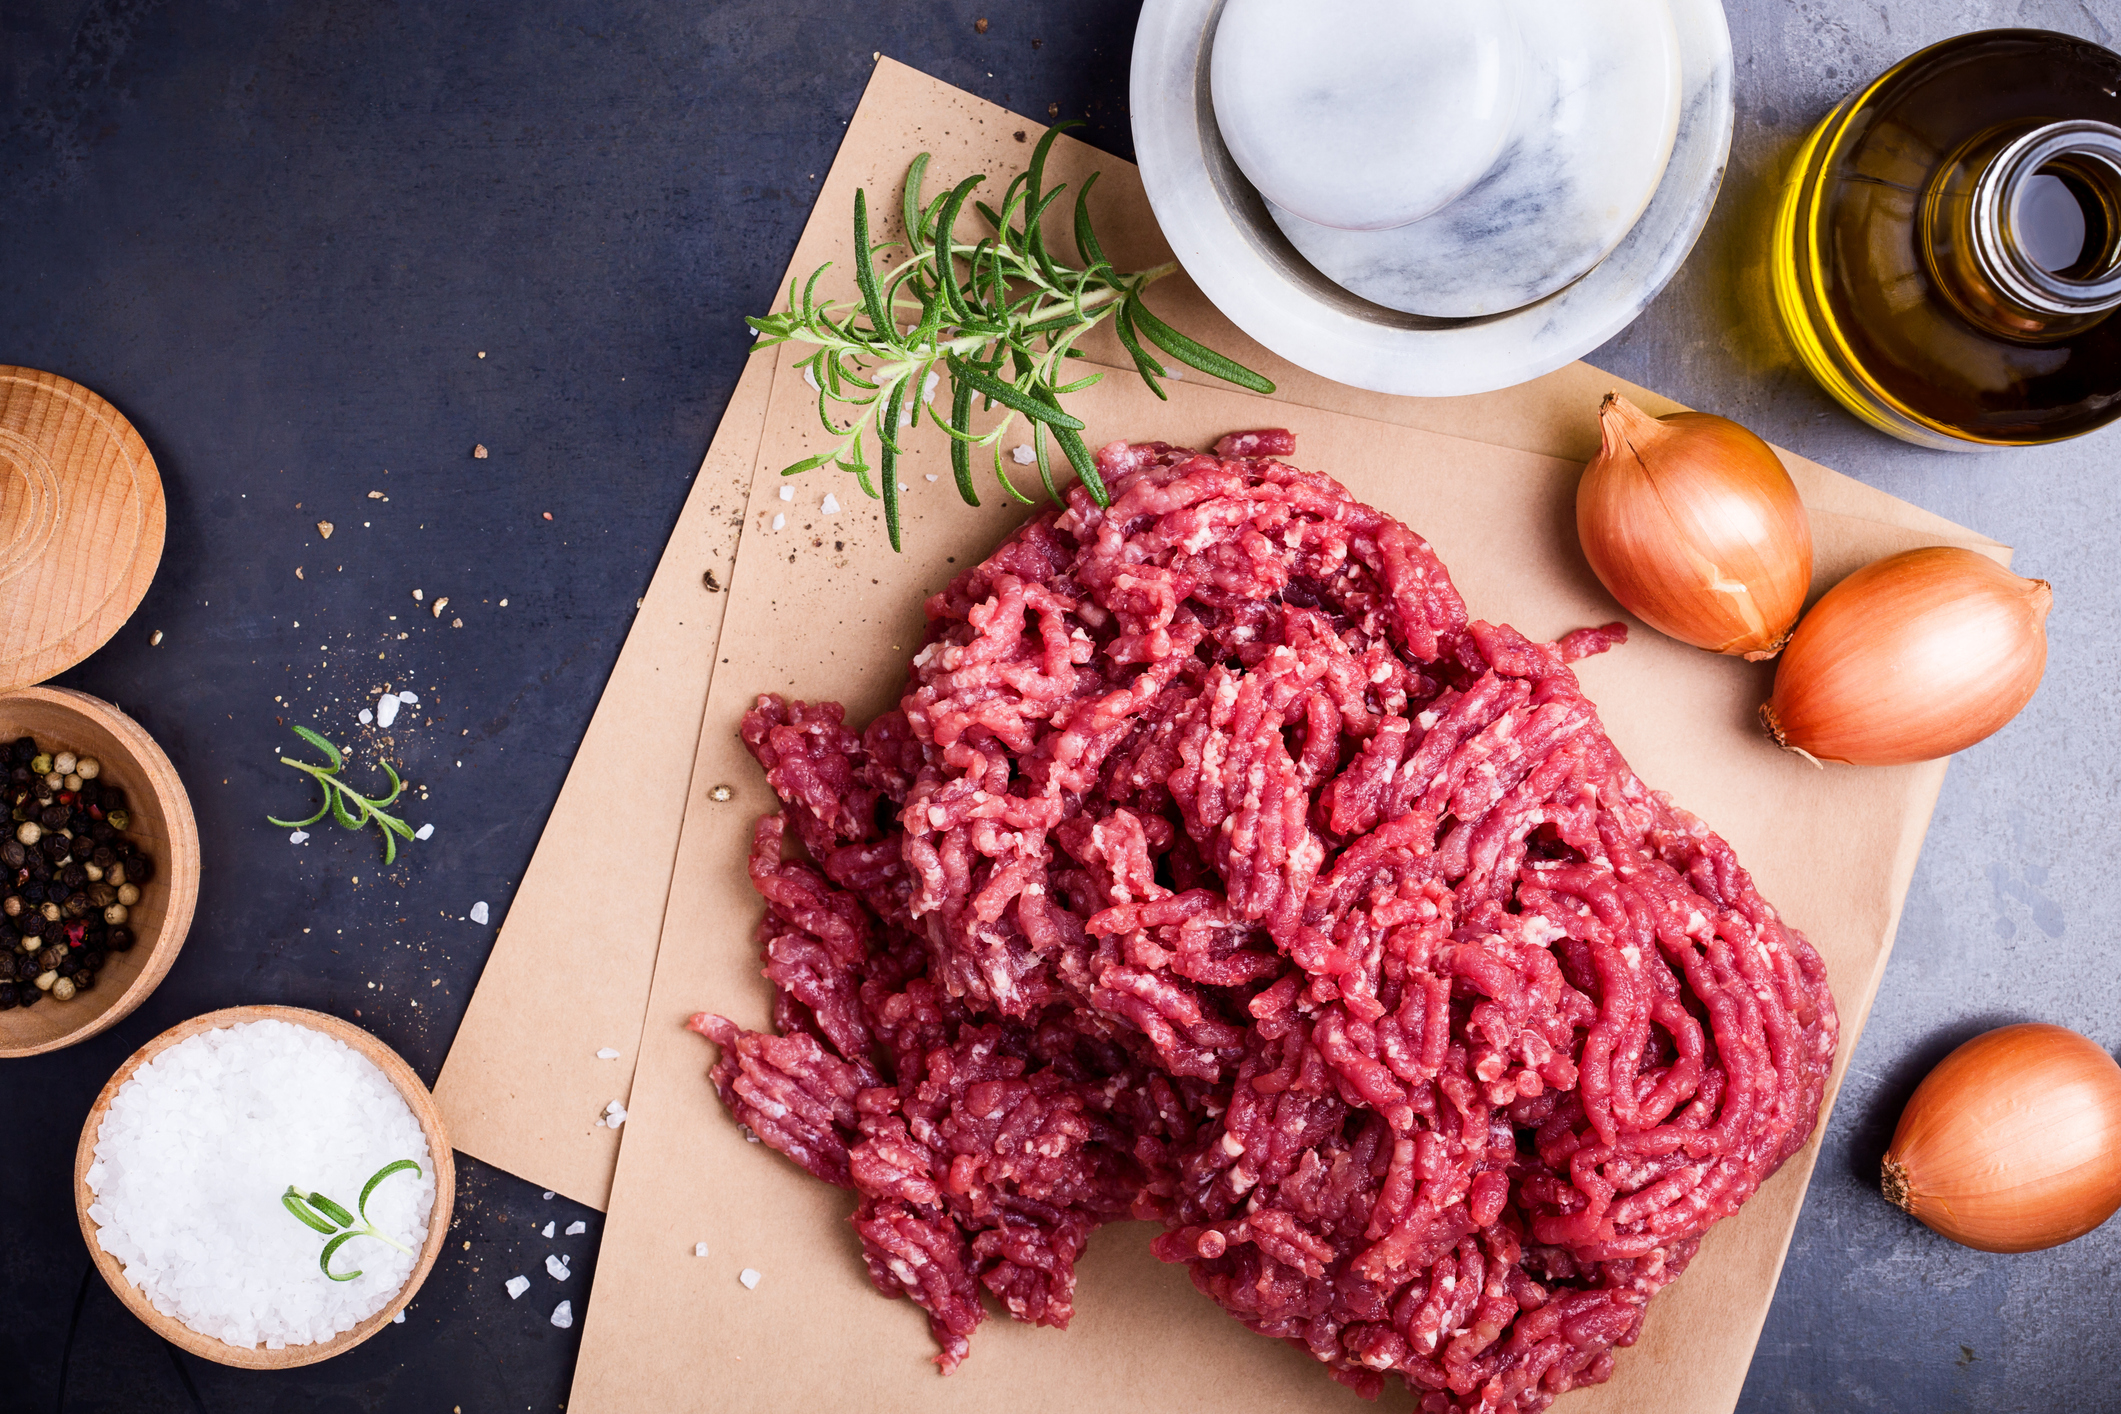 Here’s Why Eating Raw Meat is Never A Good Idea